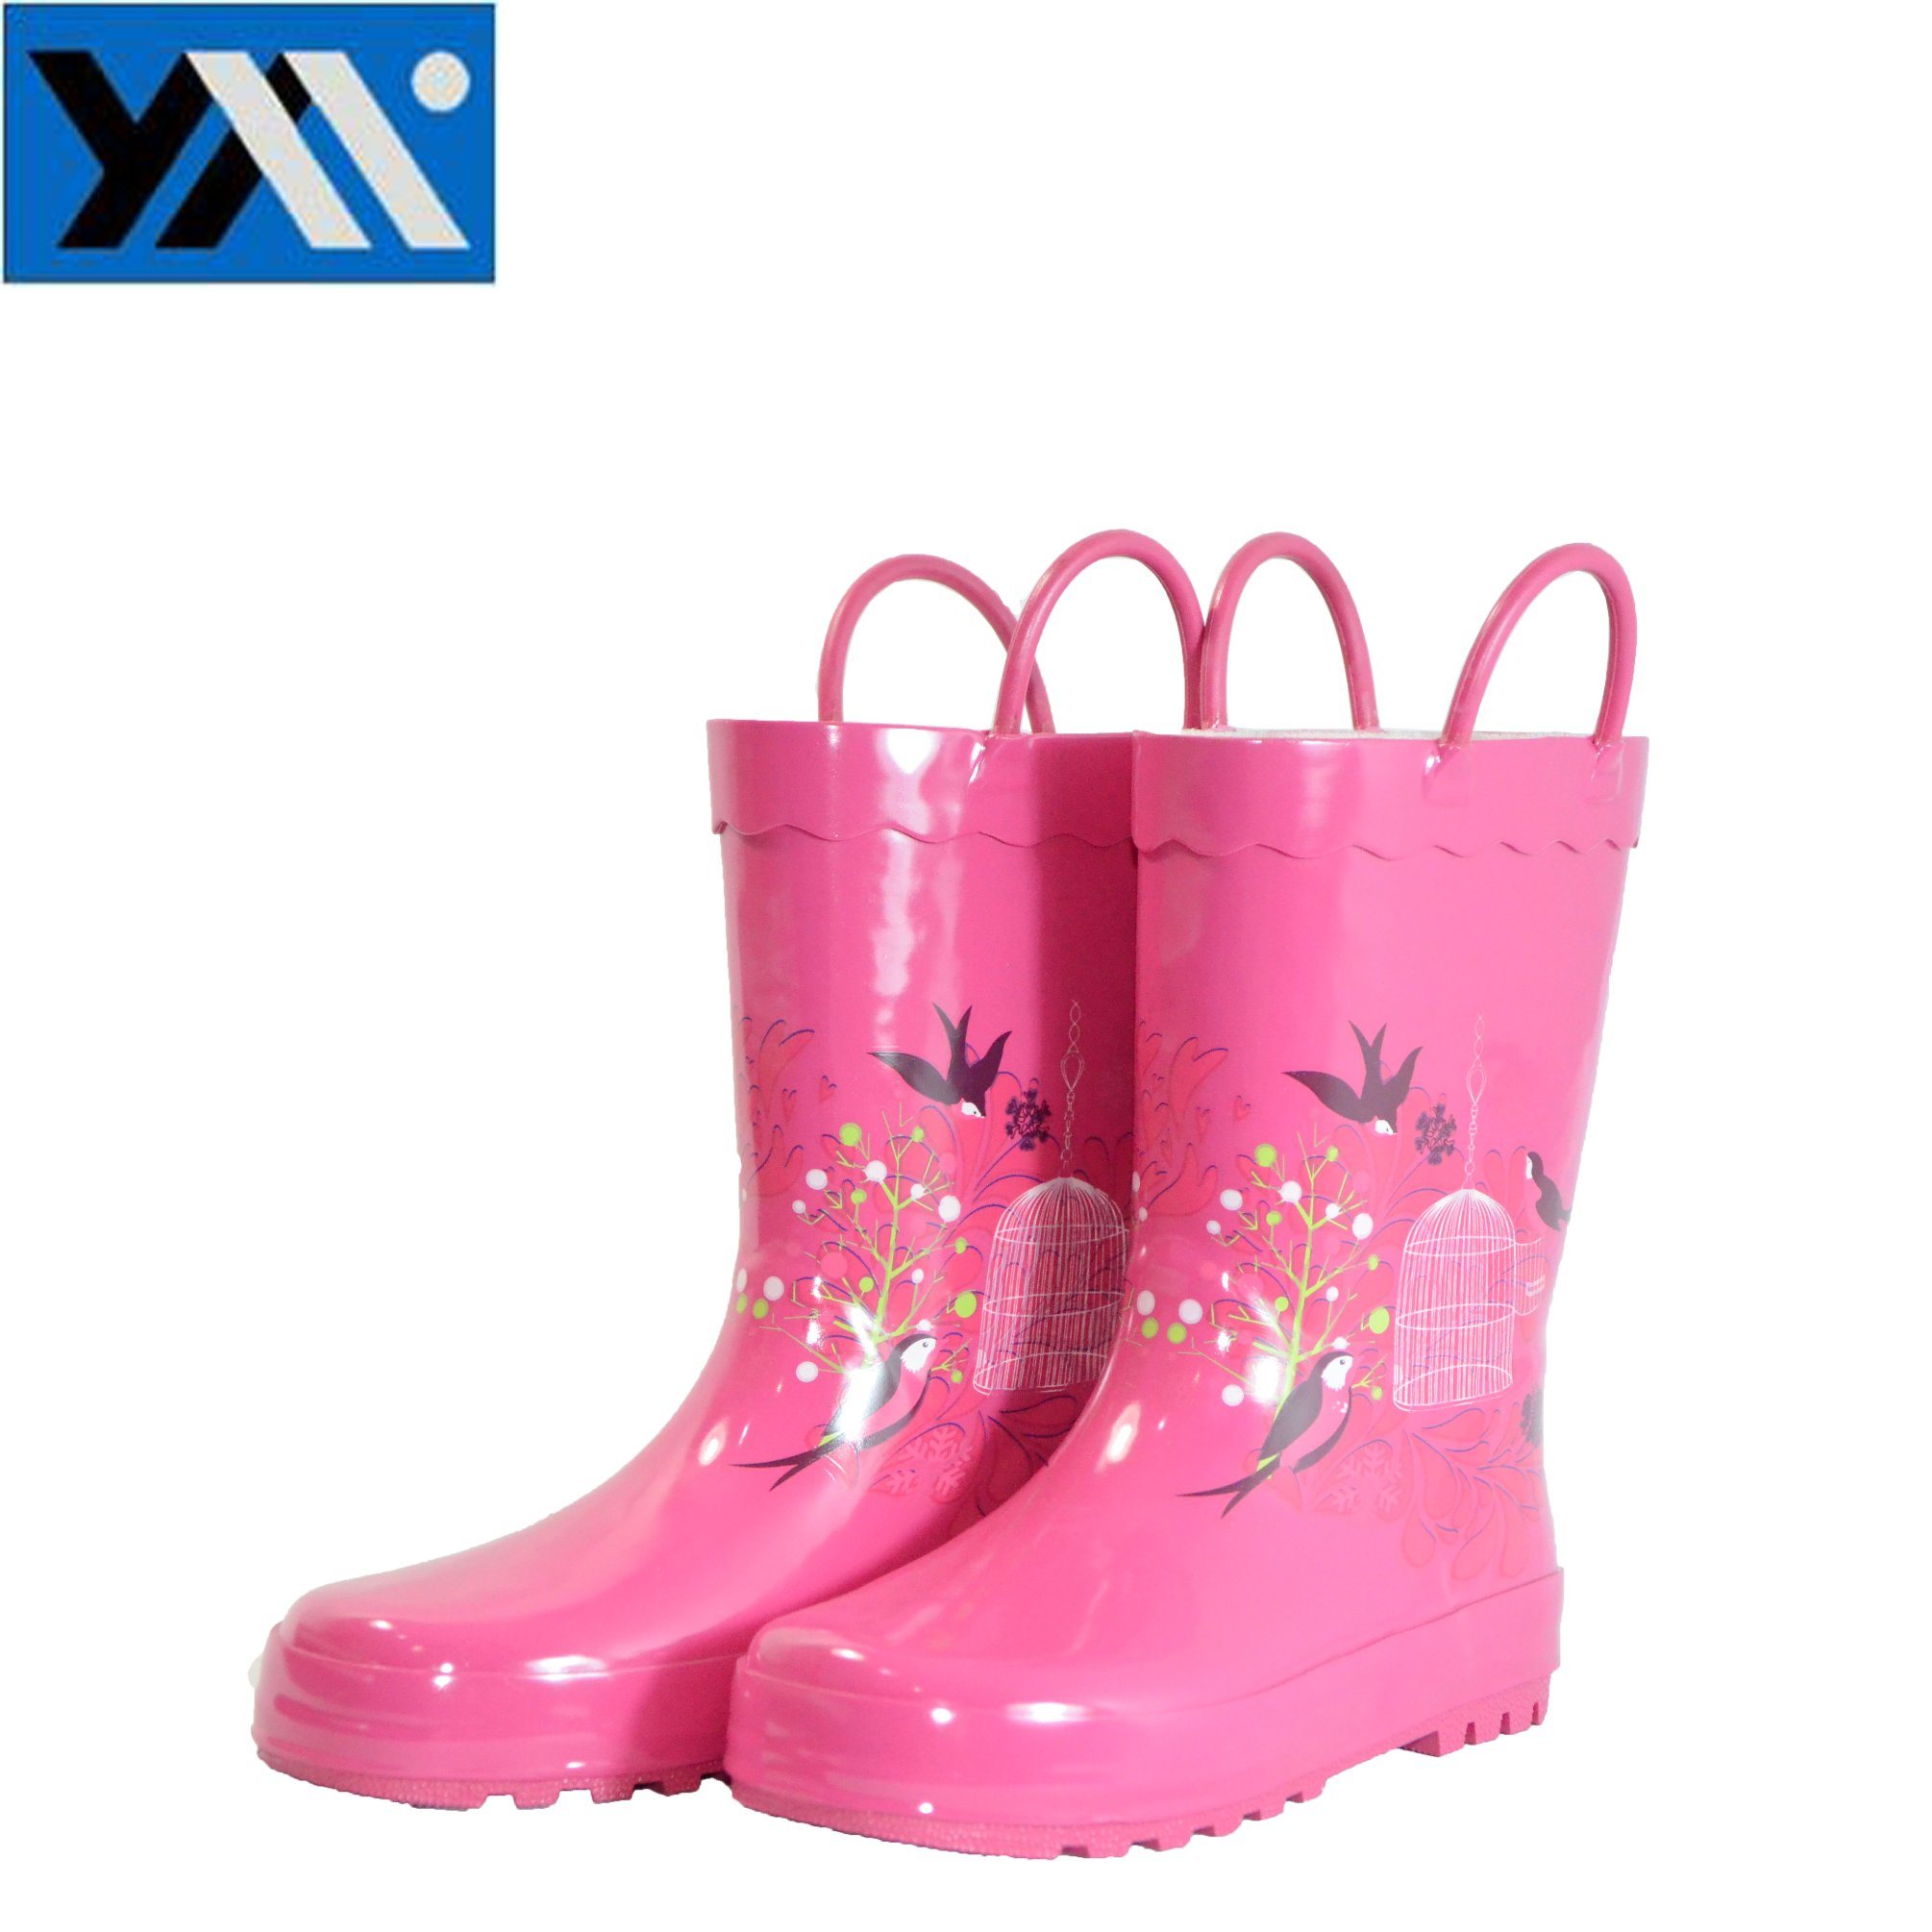 Pink Kids Rubber Rain Boots with Eye Rings